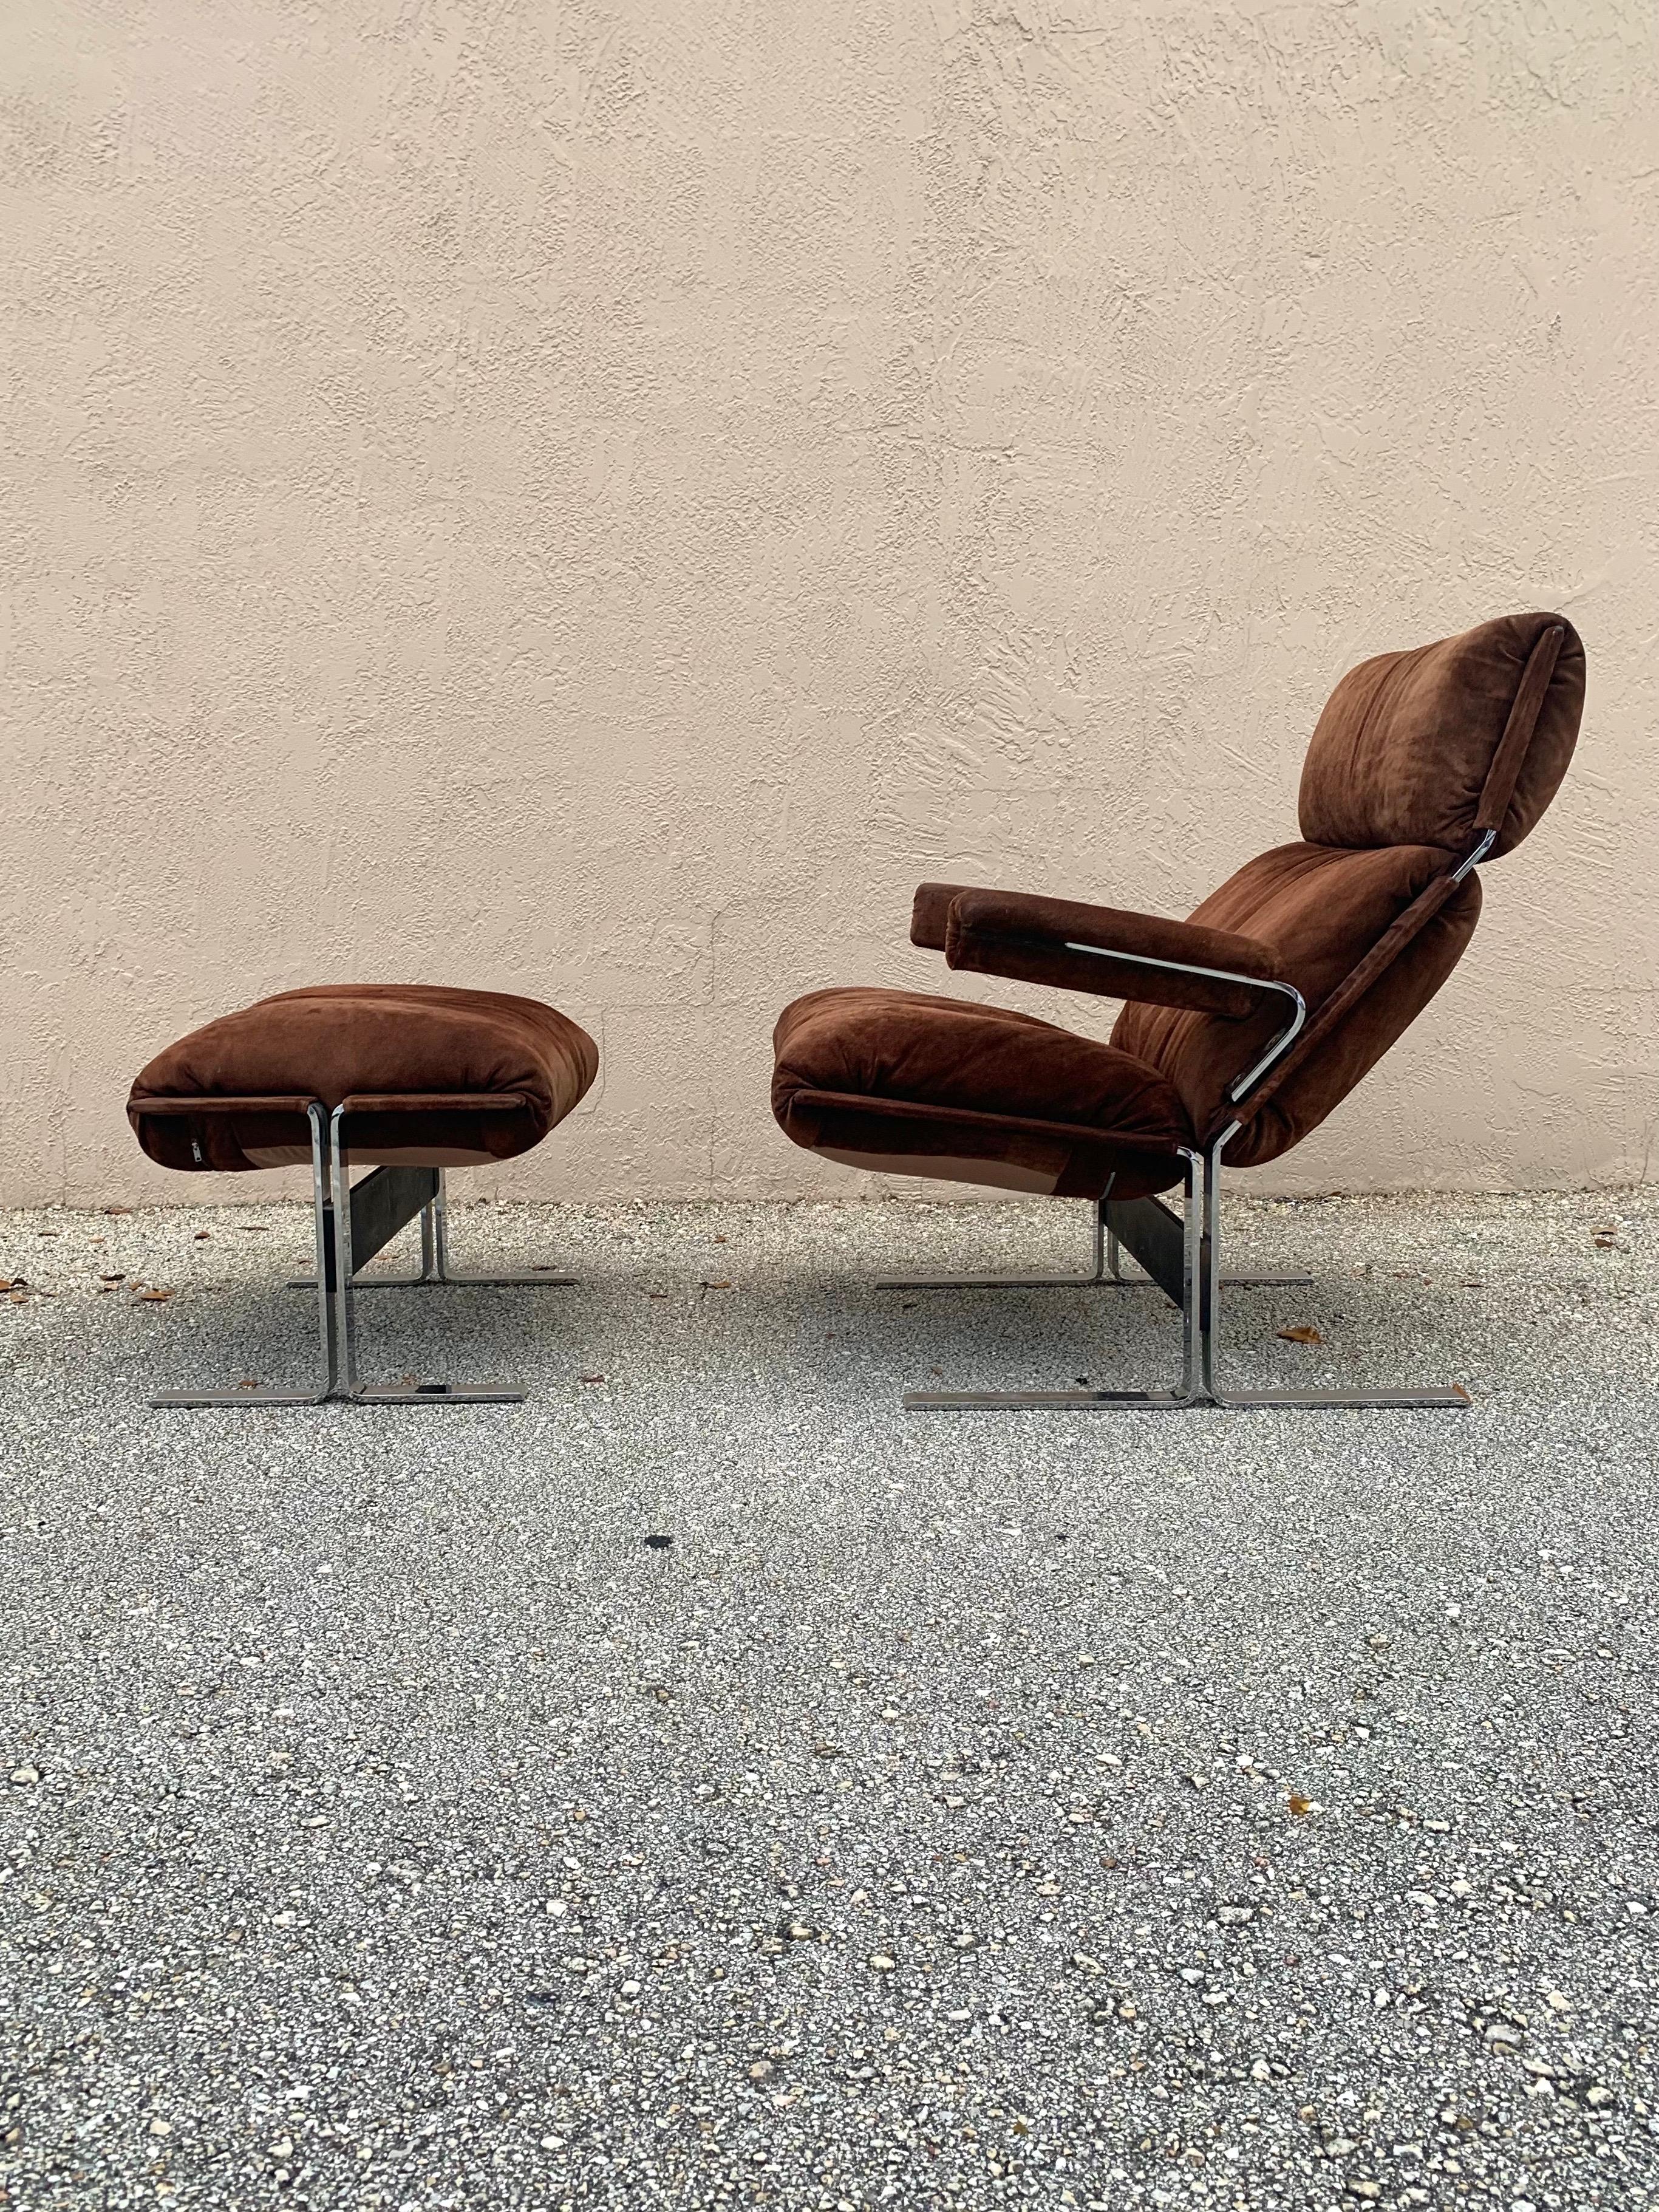 Mid-Century Modern lounge chair and ottoman designed by Richard Hersberger for Pace Furniture. Chairs are upholstered in their beautiful original brown suede leather. Frames are heavy and sturdy polished chrome with a stretcher. 

The chairs are